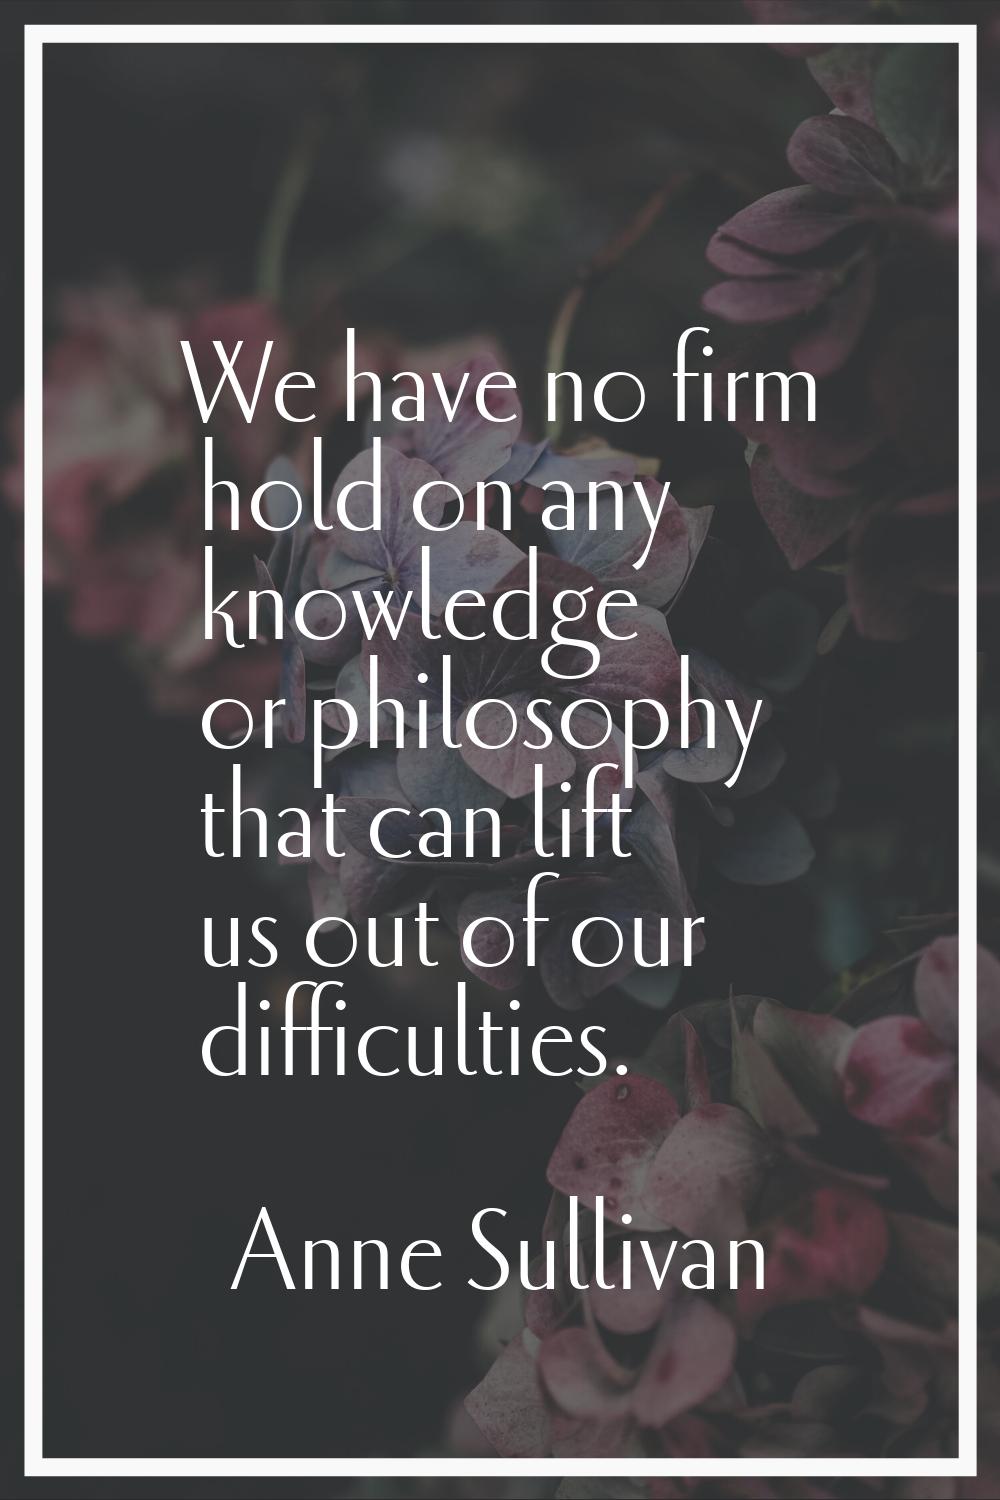 We have no firm hold on any knowledge or philosophy that can lift us out of our difficulties.